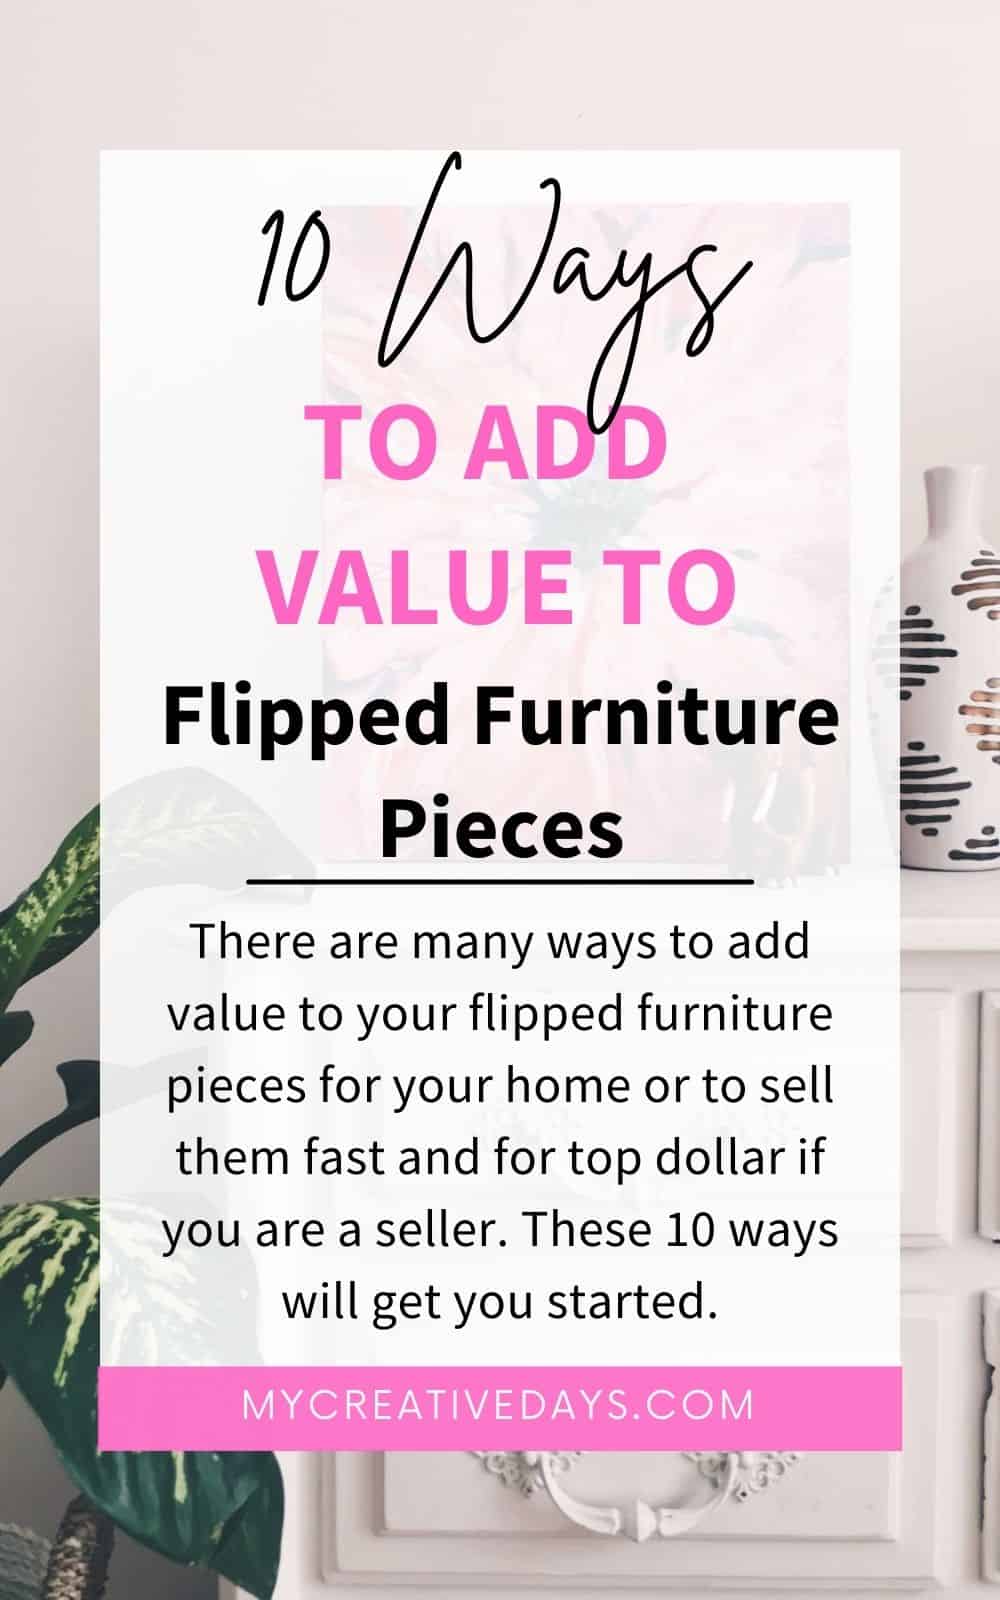 There are many ways to add value to your flipped furniture pieces for your home or to sell them fast and for top dollar if you are a seller.